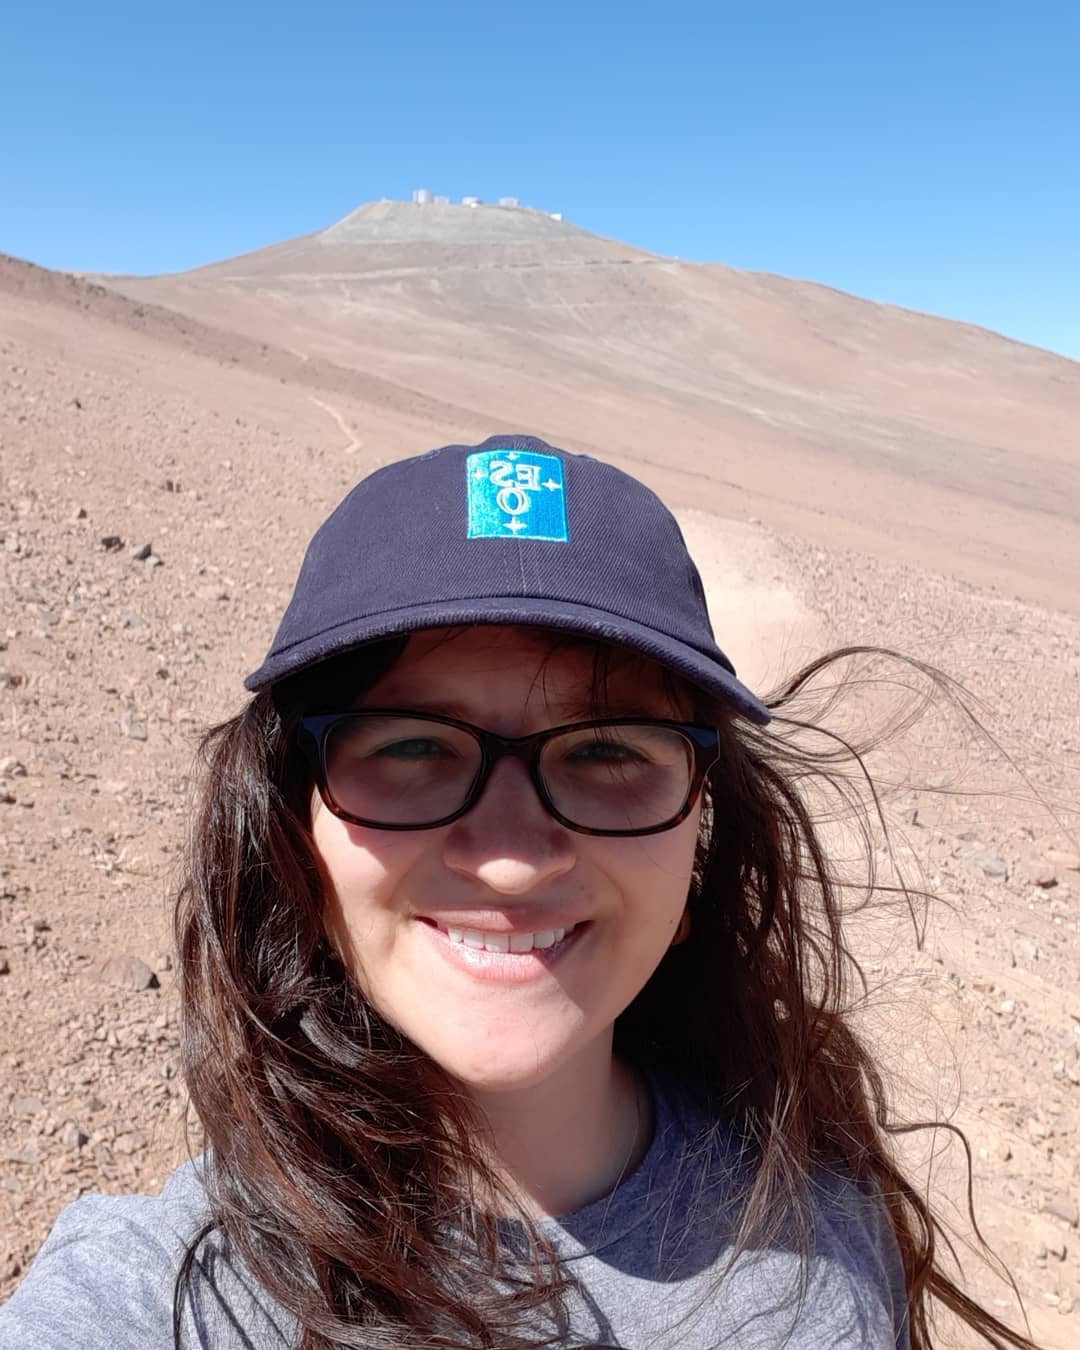 A photo of me and in the background are The Very Large Telescope at Paranal in Chile.